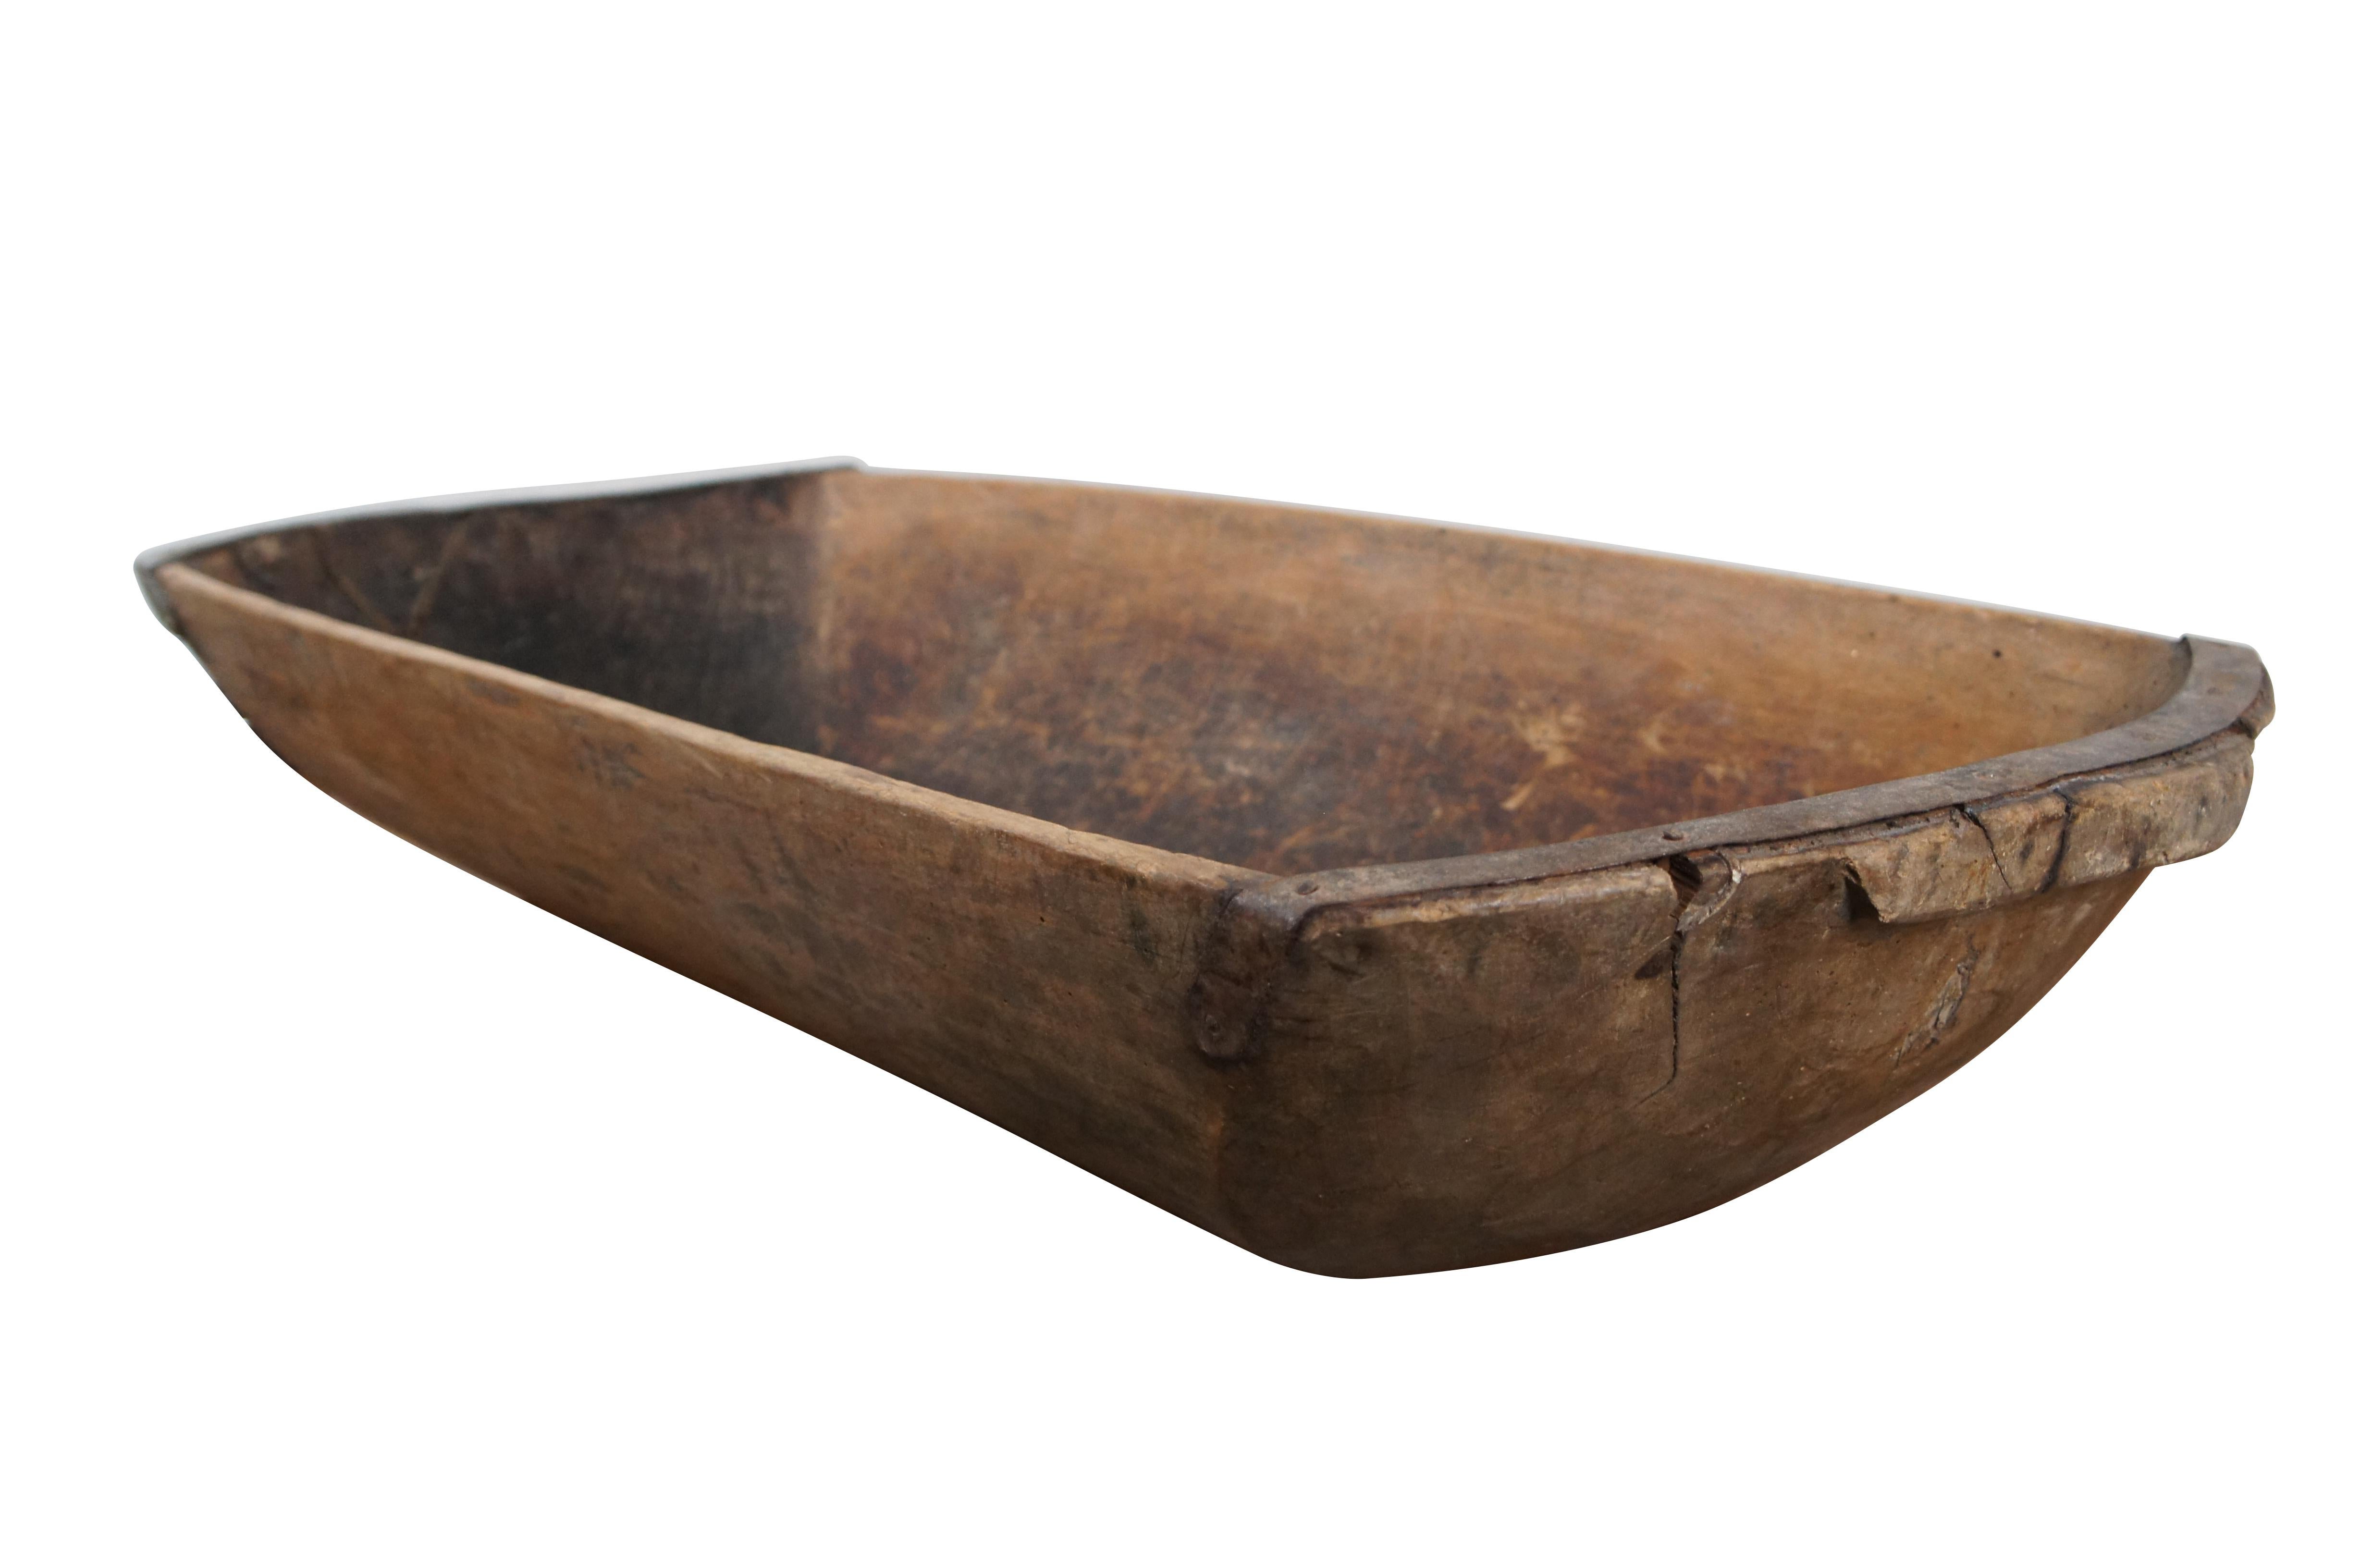 Antique, hand hewn, oversized country dough bowl / trencher featuring a rounded rectagular shape, tapered base, and iron banding / patches on the ends.

Dimensions:
44